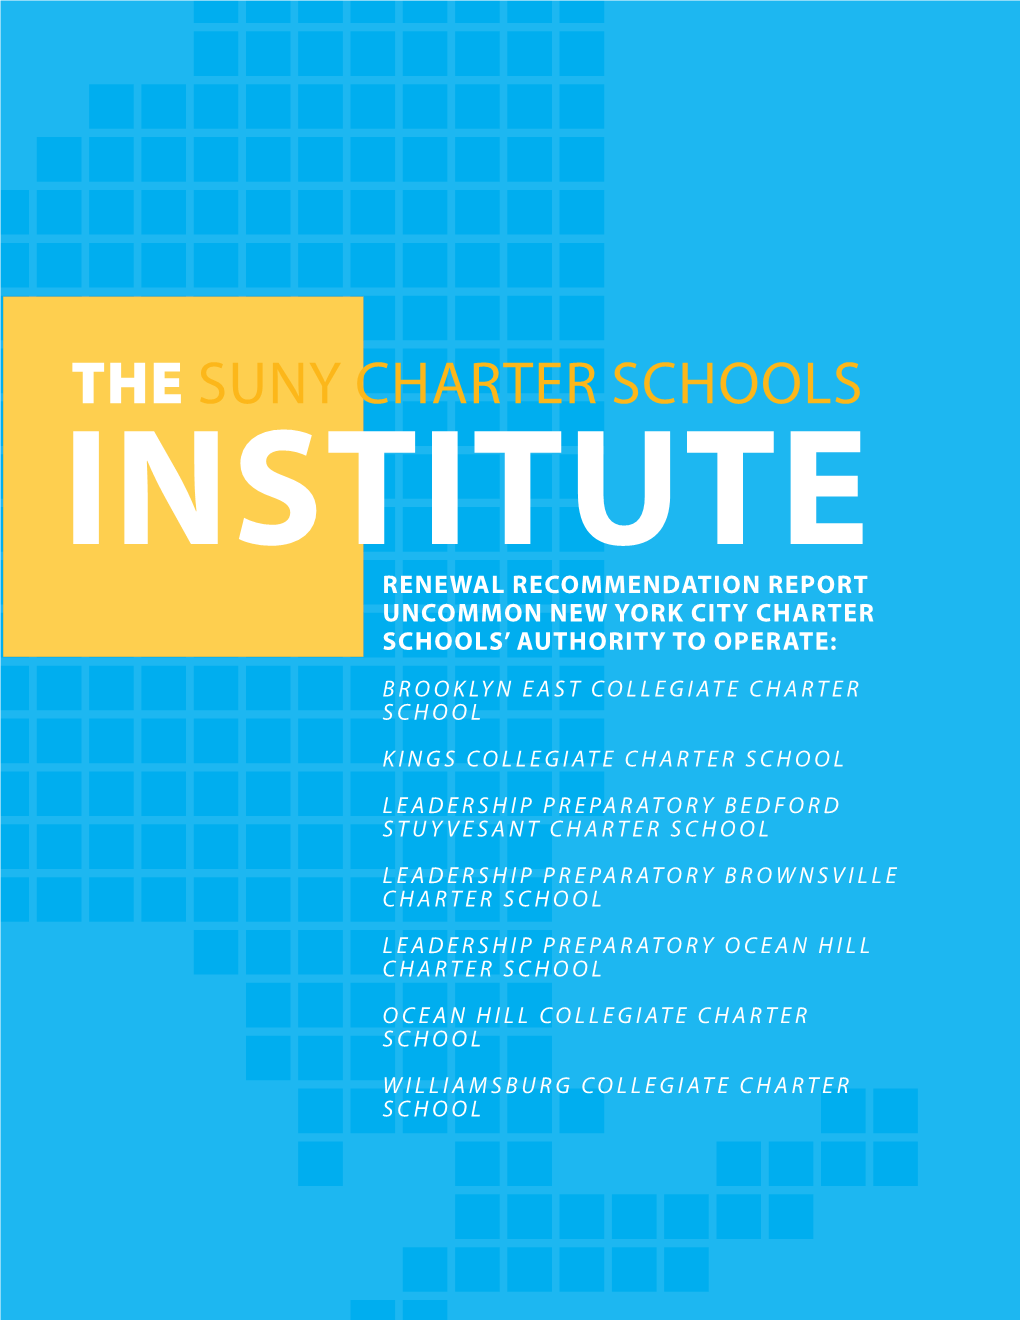 Renewal Recommendation Report Uncommon New York City Charter Schools' Authority to Operate